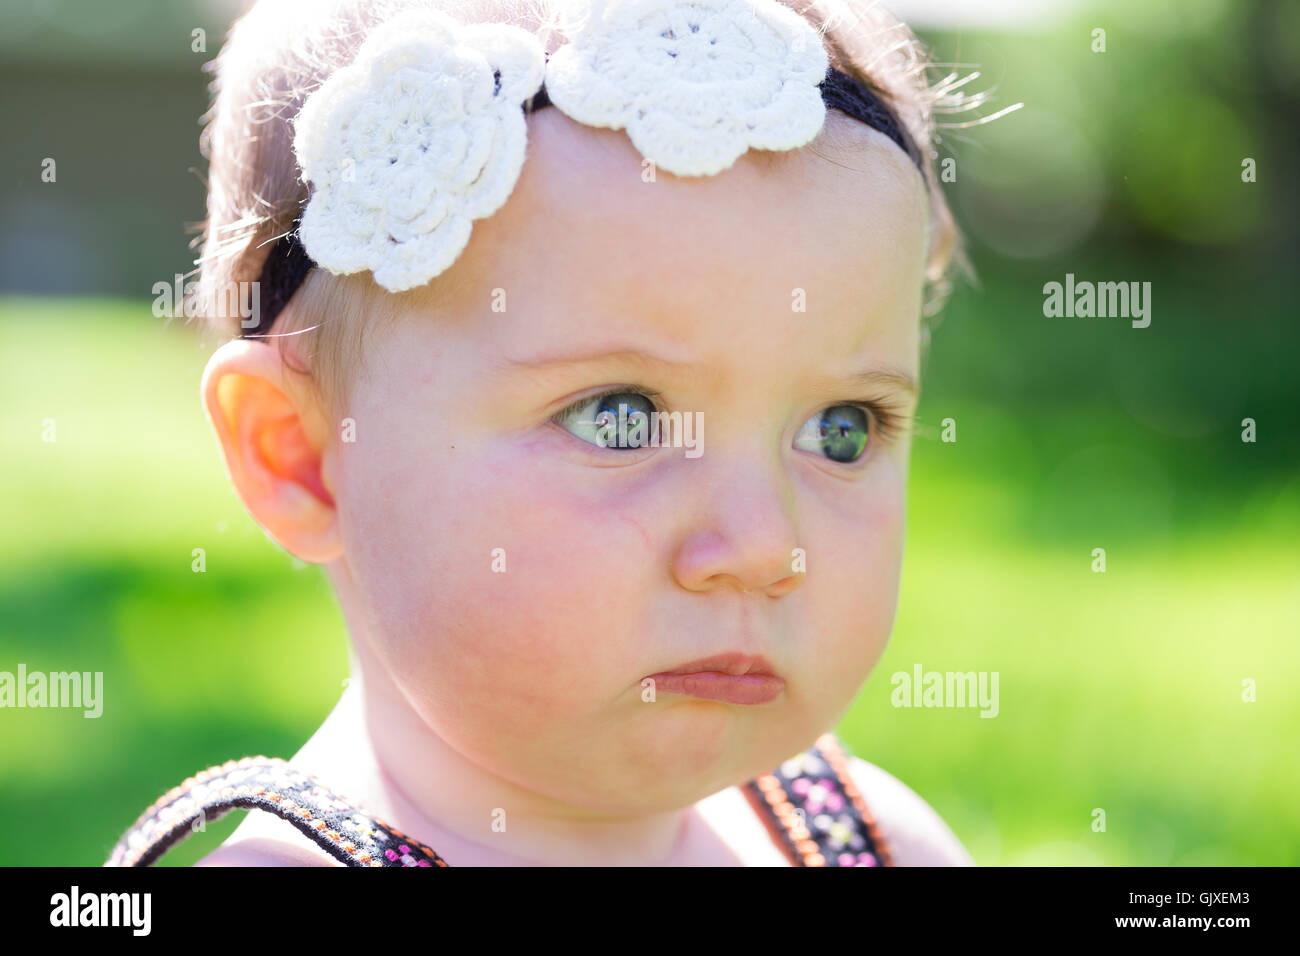 Baby girl at roughly 6 months old outdoors in a natural setting with available light for a lifestyle portrait. Stock Photo